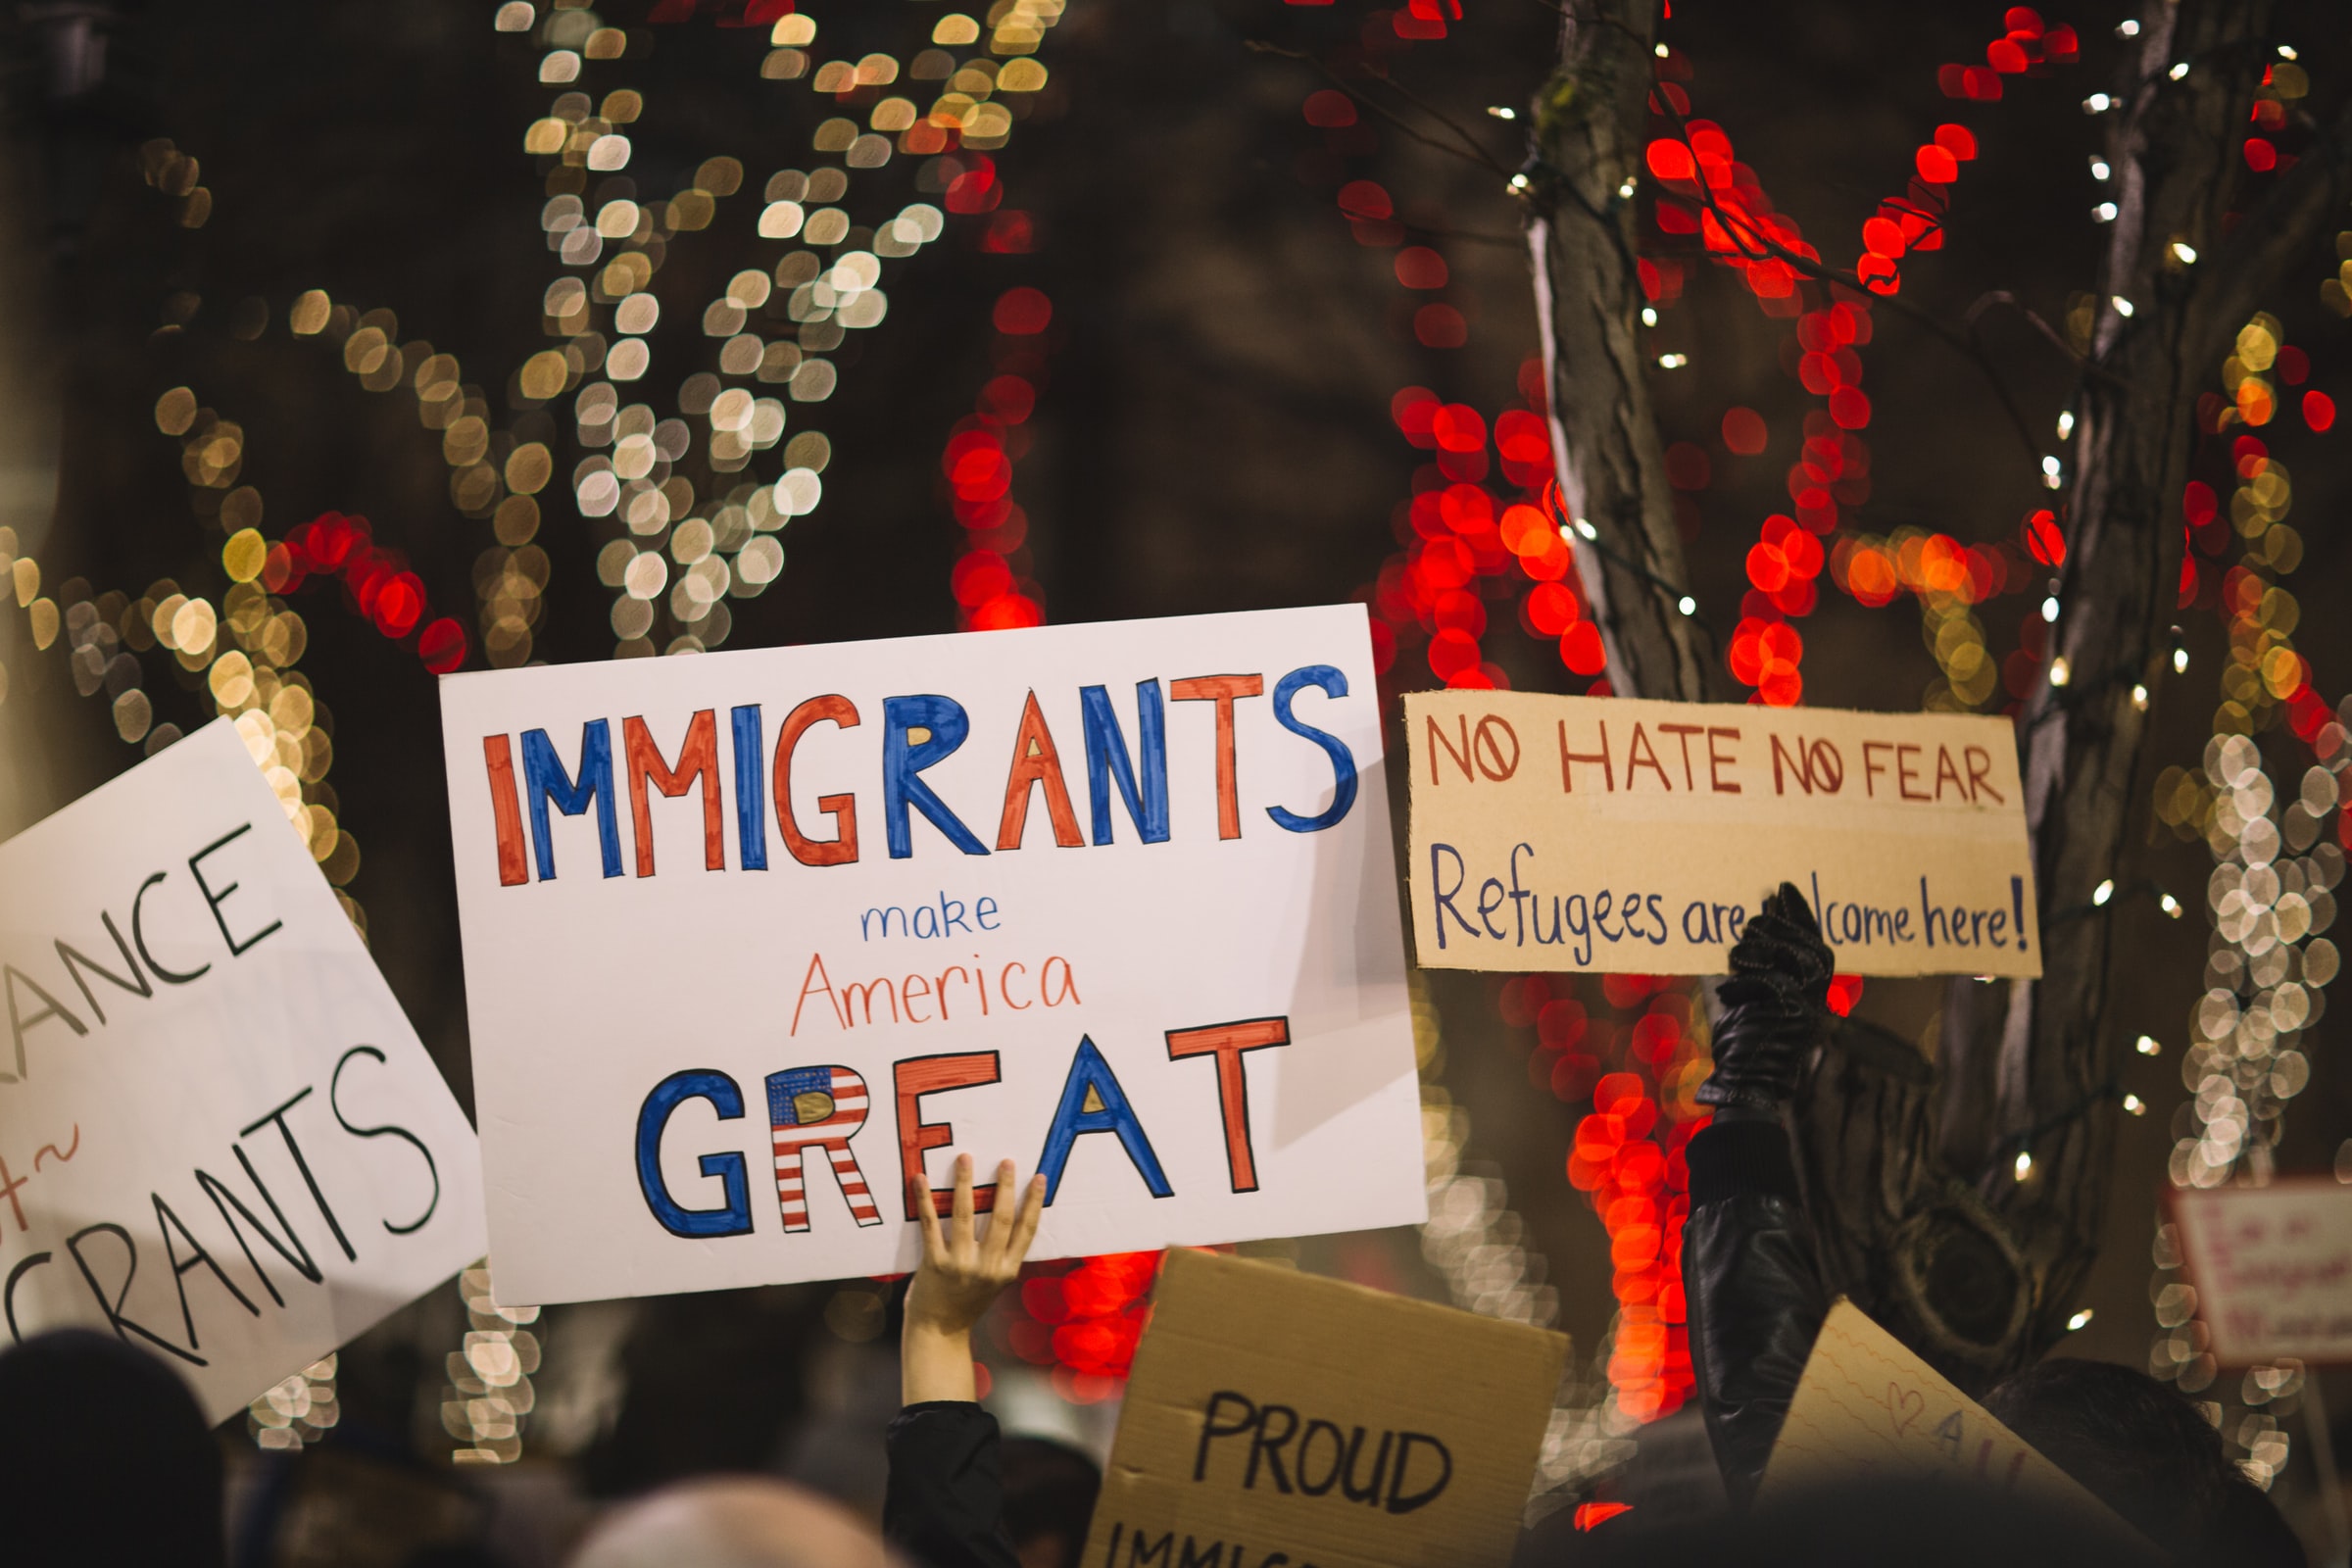 Photo of signs held up during a peaceful demonstration about Immigration in the US. While there are red and white lights in the trees in the background, in the foreground are signs that read, "Immigrants make America great" and "No hate, no fear, Refugees are welcome here!"